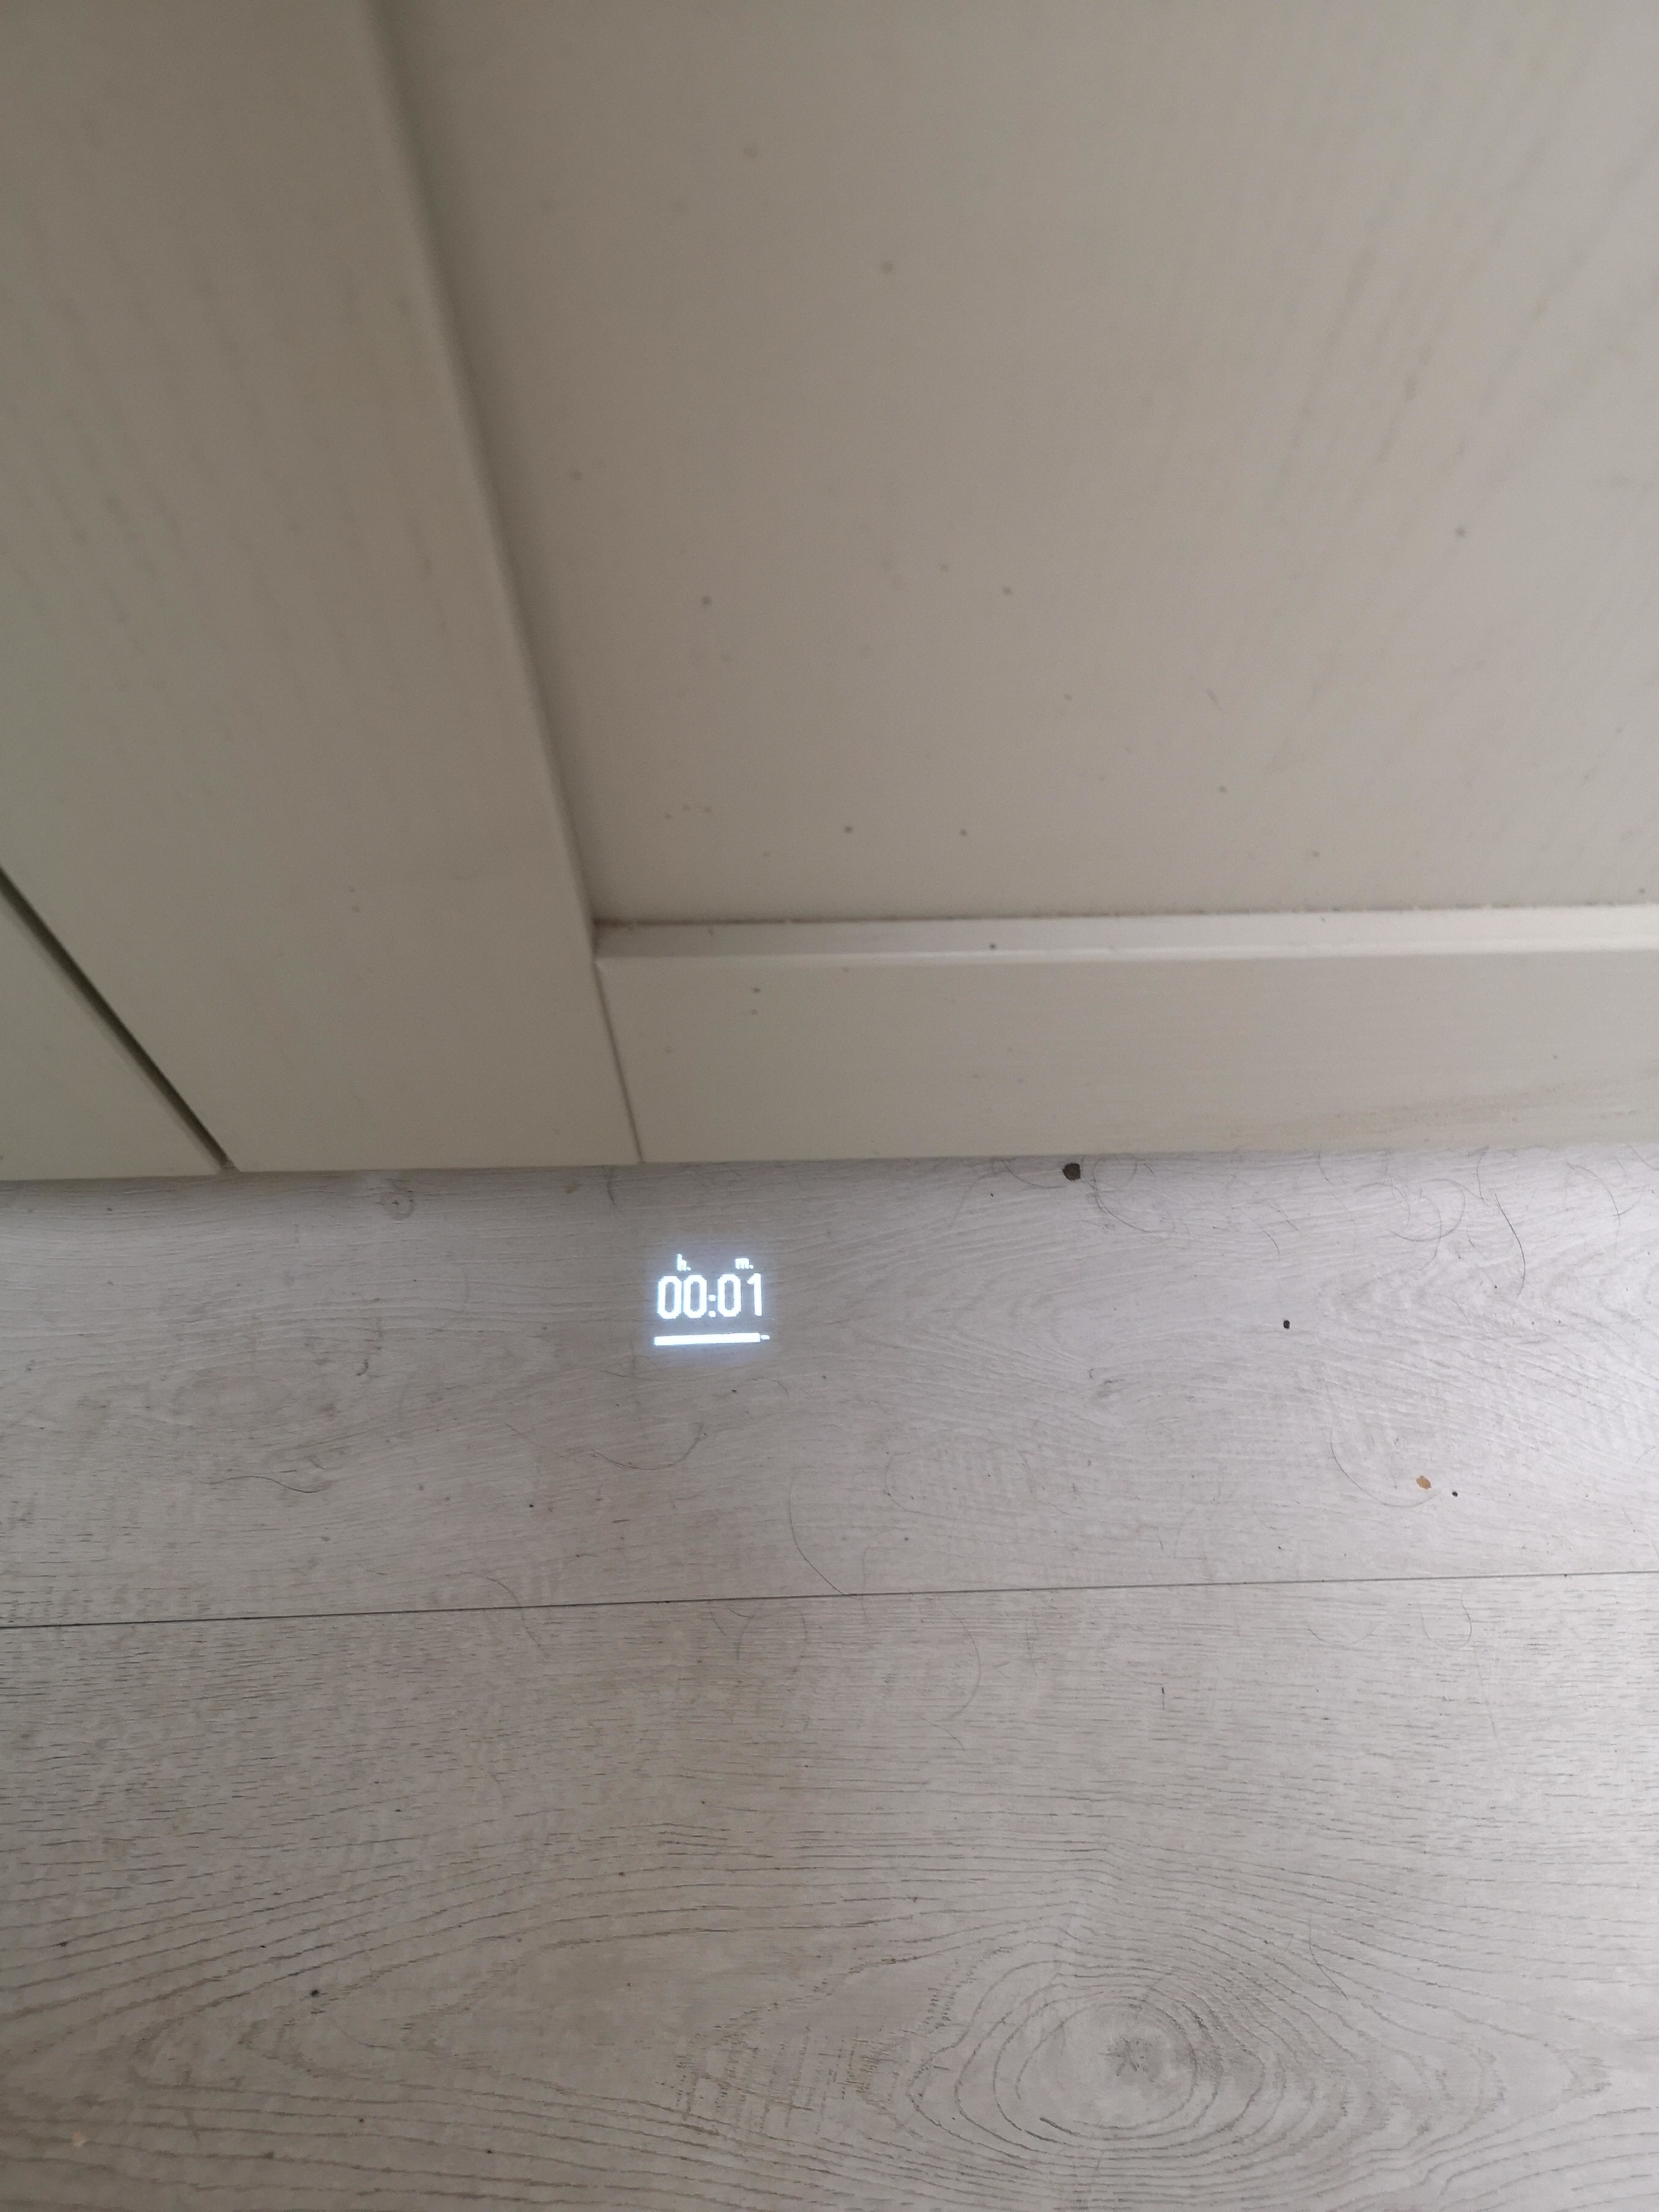 A timer projection on a dishwasher